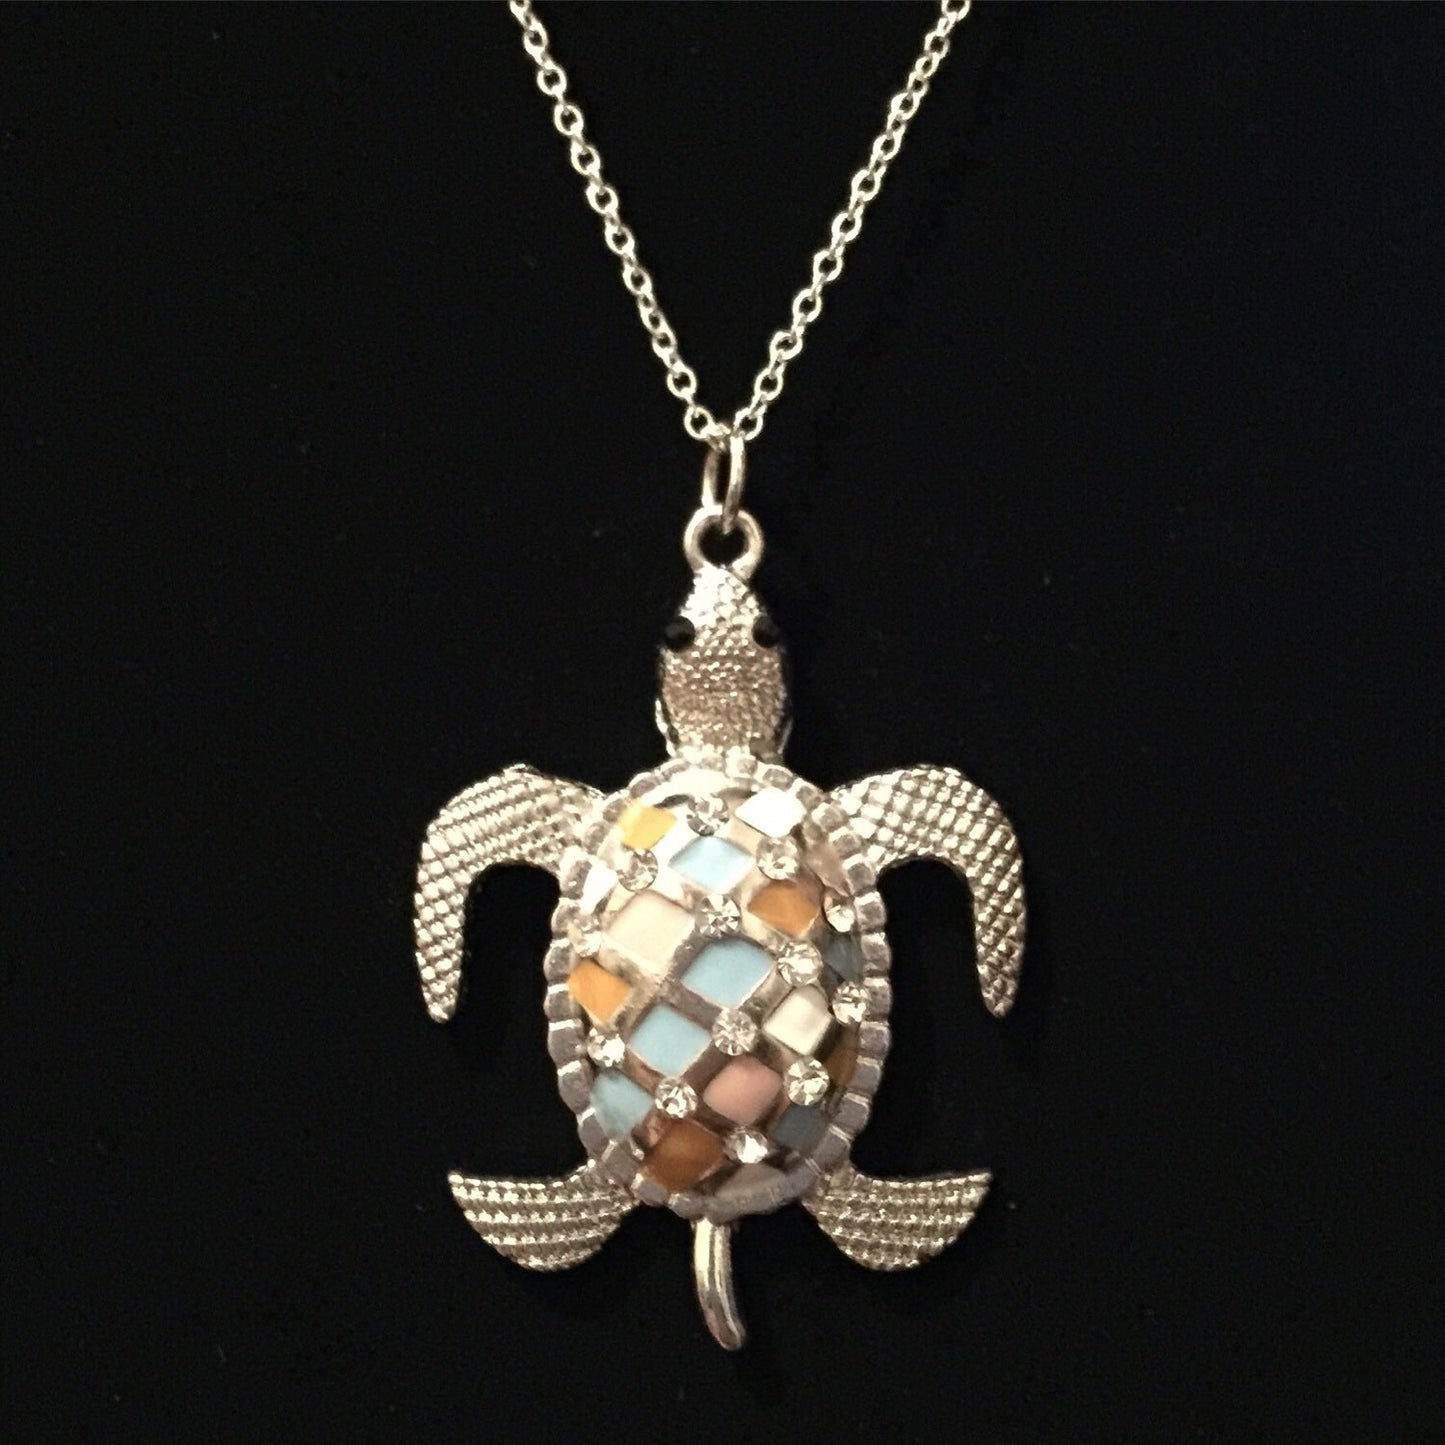 Silver Turtle pendant and chain